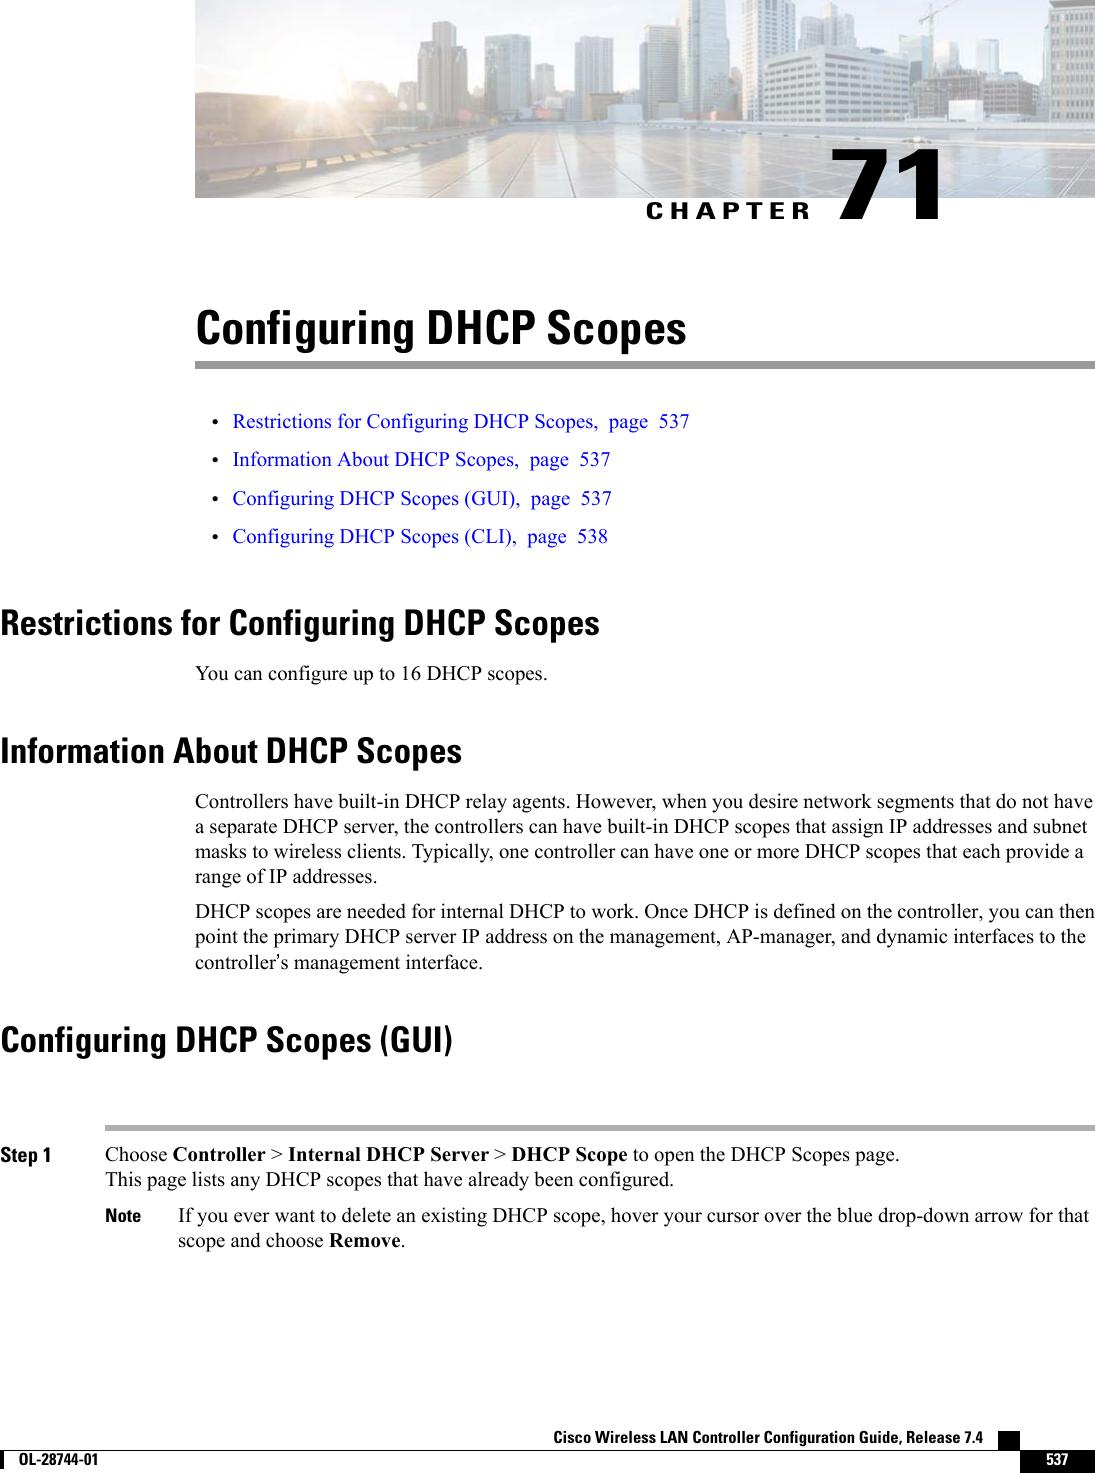 CHAPTER 71Configuring DHCP Scopes•Restrictions for Configuring DHCP Scopes, page 537•Information About DHCP Scopes, page 537•Configuring DHCP Scopes (GUI), page 537•Configuring DHCP Scopes (CLI), page 538Restrictions for Configuring DHCP ScopesYou can configure up to 16 DHCP scopes.Information About DHCP ScopesControllers have built-in DHCP relay agents. However, when you desire network segments that do not havea separate DHCP server, the controllers can have built-in DHCP scopes that assign IP addresses and subnetmasks to wireless clients. Typically, one controller can have one or more DHCP scopes that each provide arange of IP addresses.DHCP scopes are needed for internal DHCP to work. Once DHCP is defined on the controller, you can thenpoint the primary DHCP server IP address on the management, AP-manager, and dynamic interfaces to thecontroller’s management interface.Configuring DHCP Scopes (GUI)Step 1 Choose Controller &gt;Internal DHCP Server &gt;DHCP Scope to open the DHCP Scopes page.This page lists any DHCP scopes that have already been configured.If you ever want to delete an existing DHCP scope, hover your cursor over the blue drop-down arrow for thatscope and choose Remove.NoteCisco Wireless LAN Controller Configuration Guide, Release 7.4        OL-28744-01 537